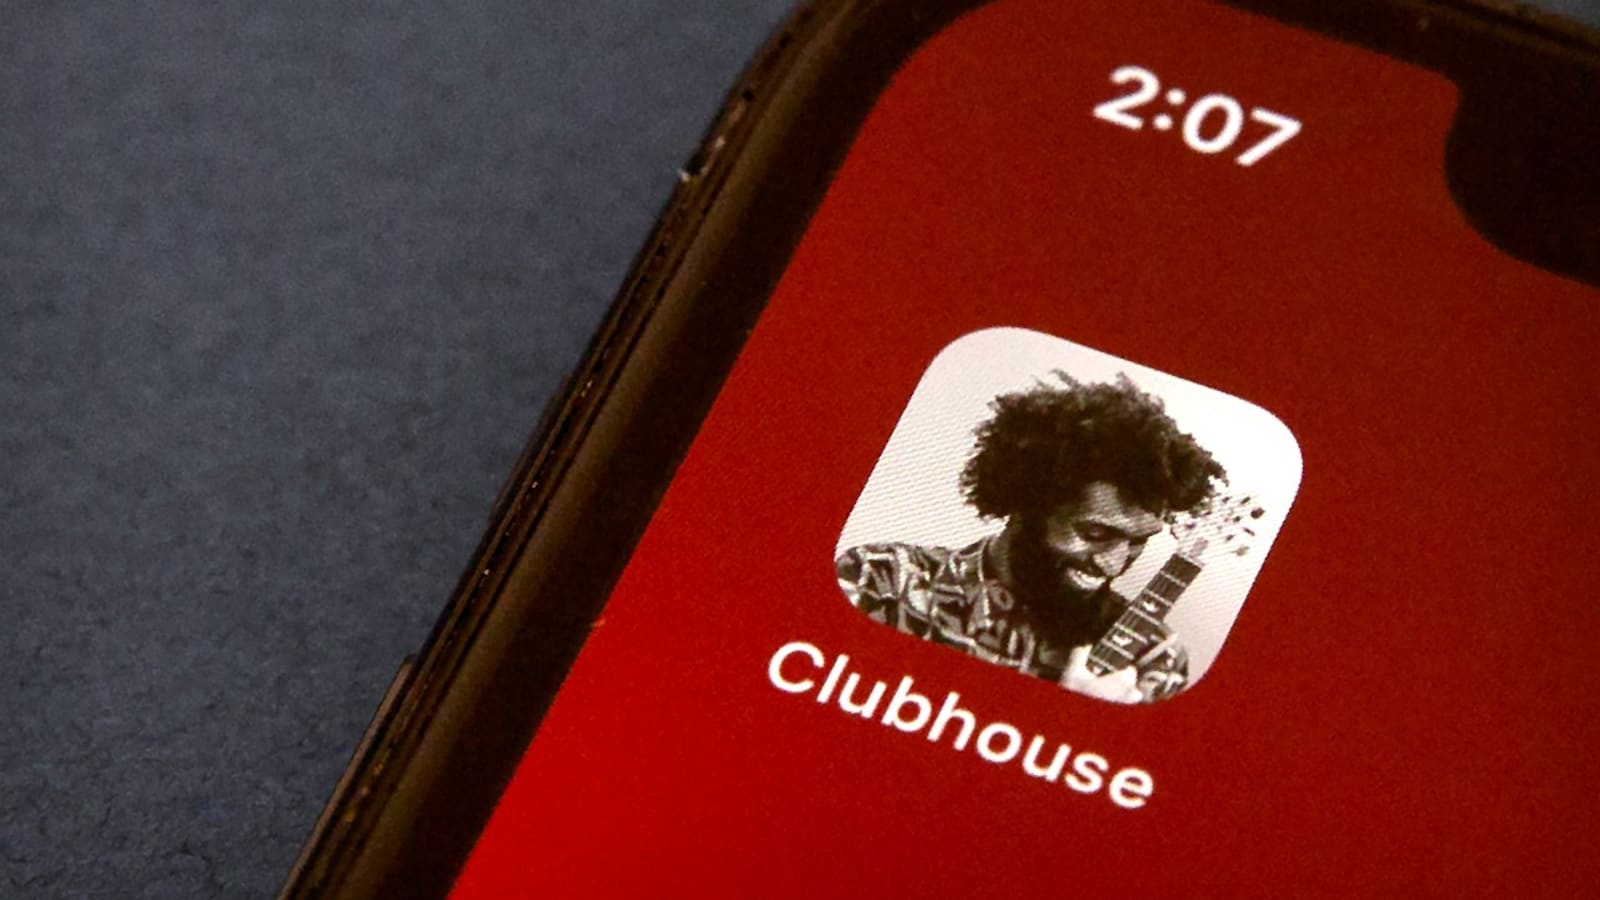 In-Depth | The Clubhouse sensation: Why the new social media app is a  screaming success and what lies ahead